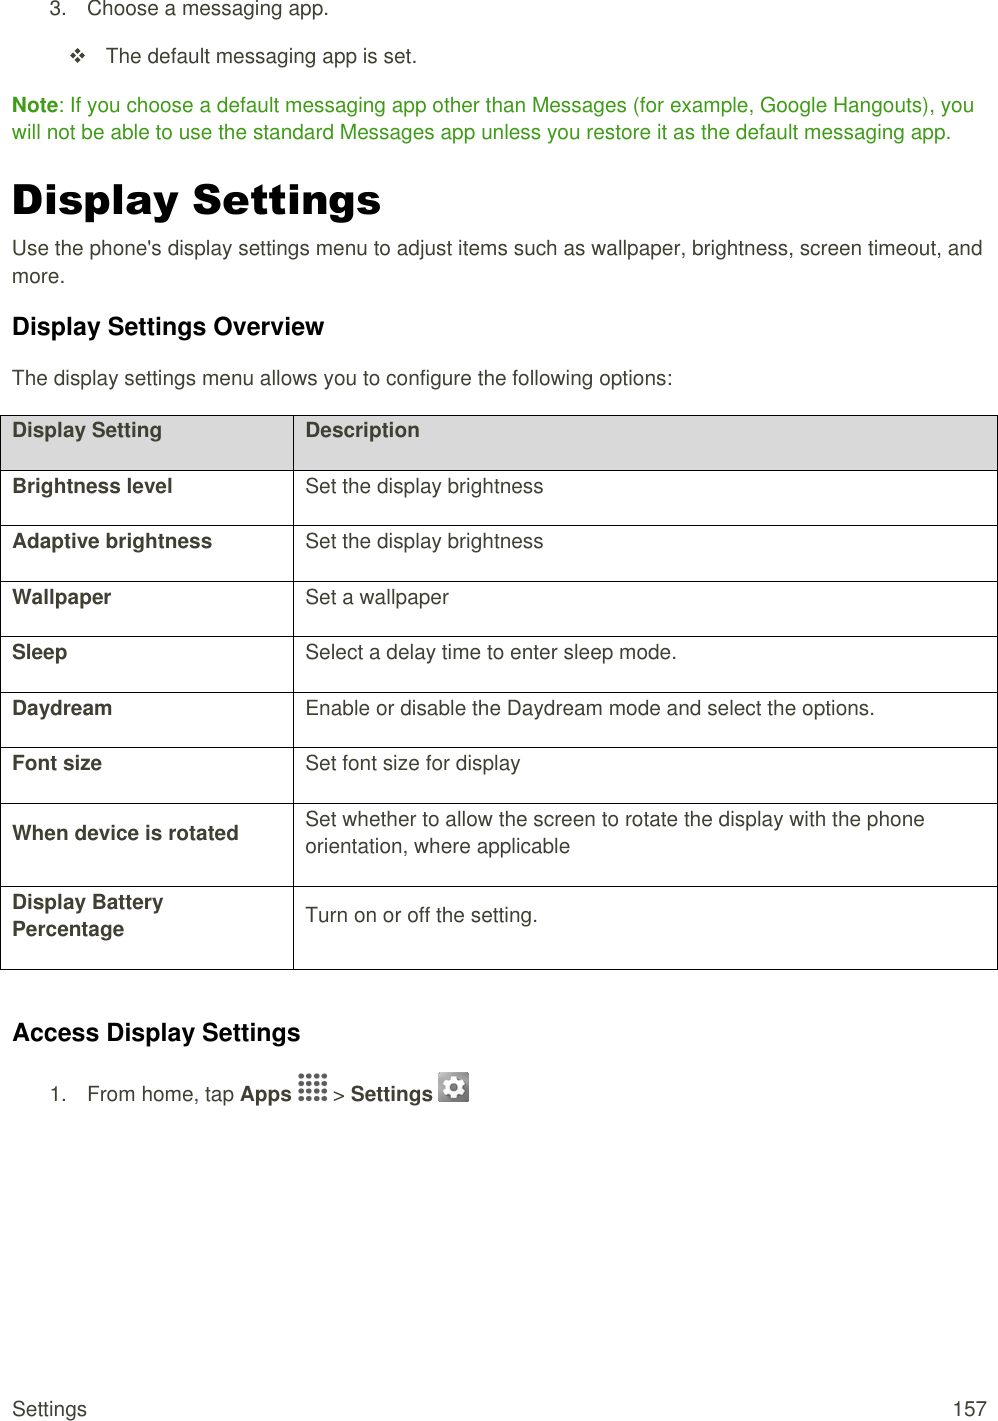 Settings  157 3.  Choose a messaging app.    The default messaging app is set. Note: If you choose a default messaging app other than Messages (for example, Google Hangouts), you will not be able to use the standard Messages app unless you restore it as the default messaging app. Display Settings Use the phone&apos;s display settings menu to adjust items such as wallpaper, brightness, screen timeout, and more. Display Settings Overview The display settings menu allows you to configure the following options: Display Setting Description Brightness level Set the display brightness Adaptive brightness Set the display brightness Wallpaper Set a wallpaper Sleep Select a delay time to enter sleep mode. Daydream Enable or disable the Daydream mode and select the options. Font size Set font size for display When device is rotated Set whether to allow the screen to rotate the display with the phone orientation, where applicable Display Battery Percentage Turn on or off the setting.  Access Display Settings 1.  From home, tap Apps   &gt; Settings    